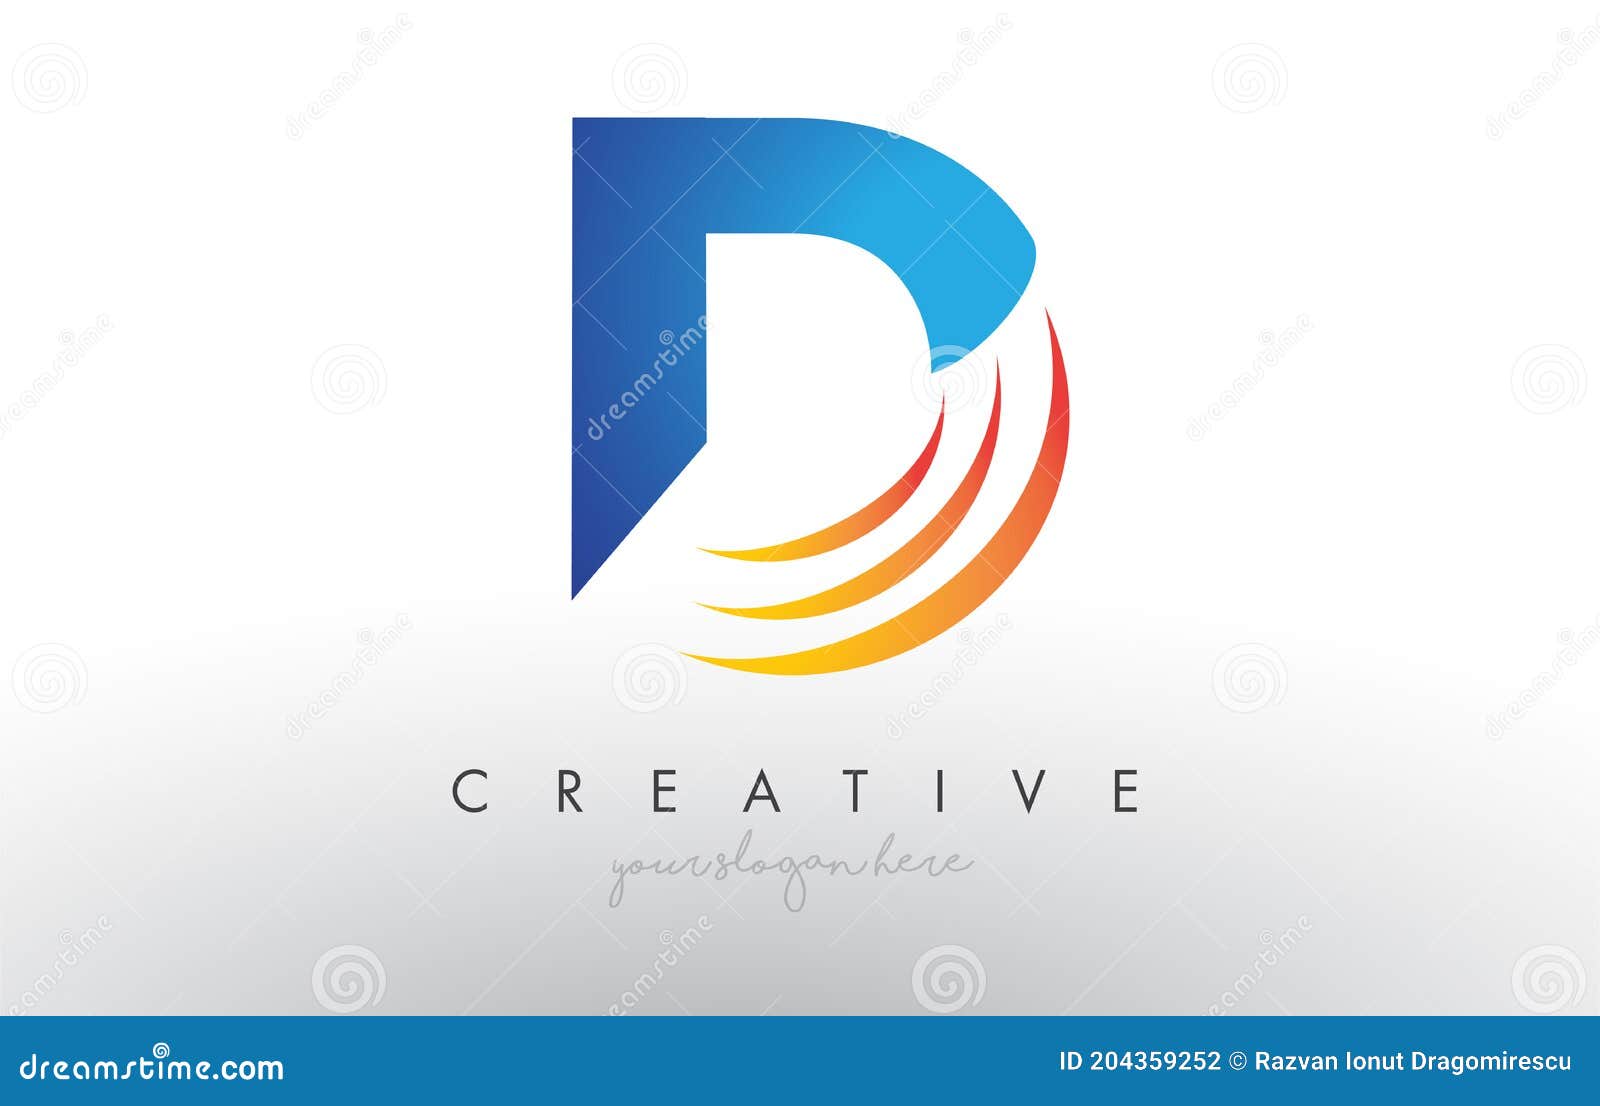 Creative Corporate D Letter Logo Icon Design with Blue and Yellow ...